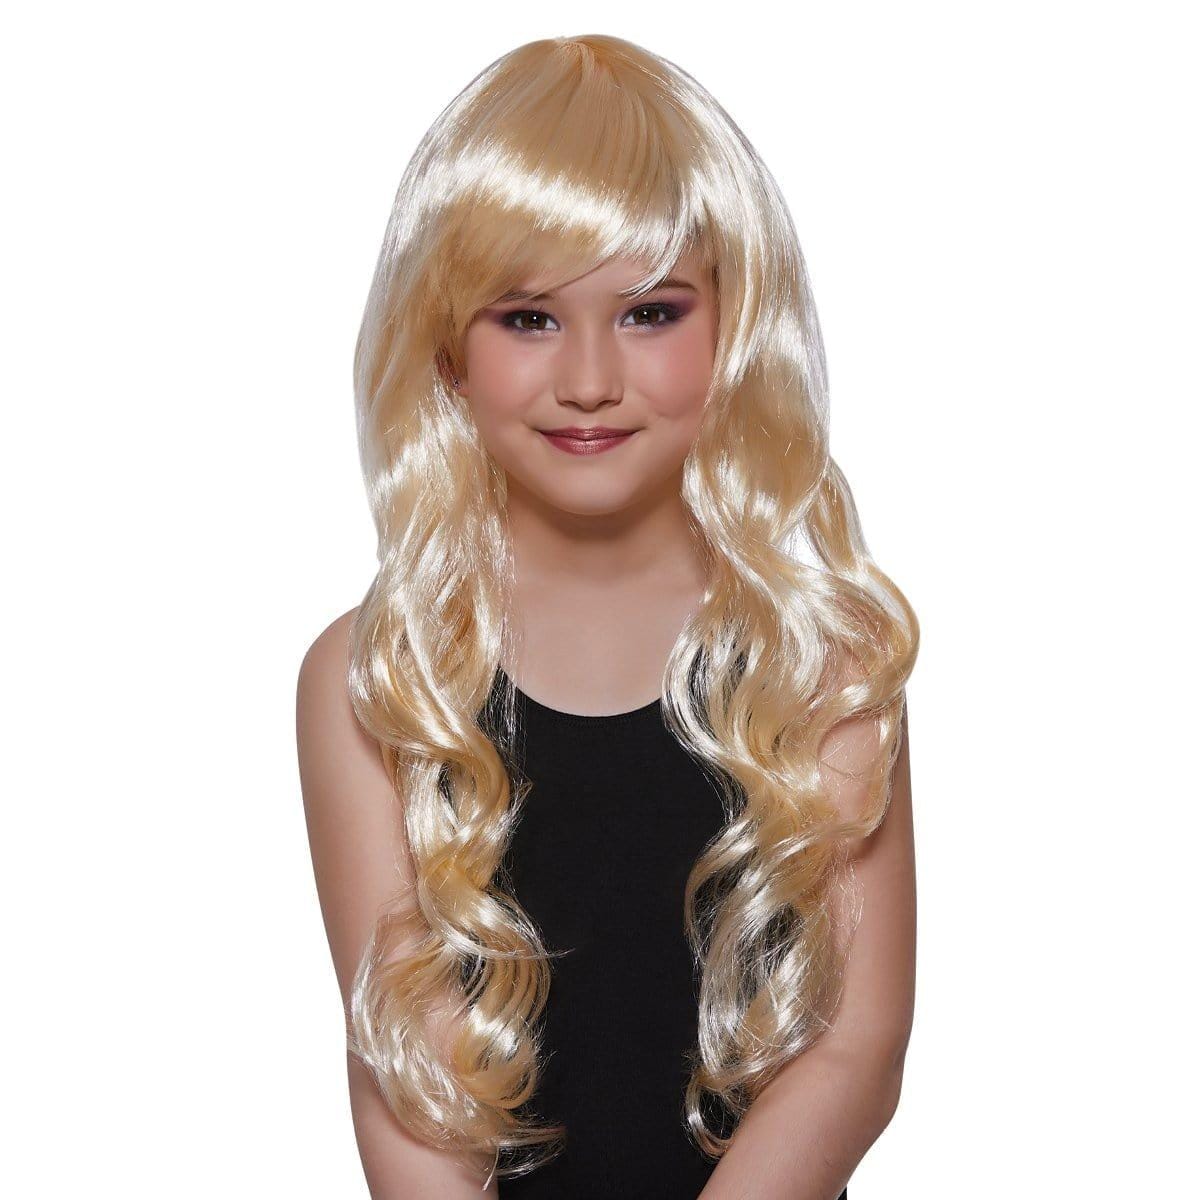 Buy Costume Accessories Blond Petite Diva wig for girls sold at Party Expert